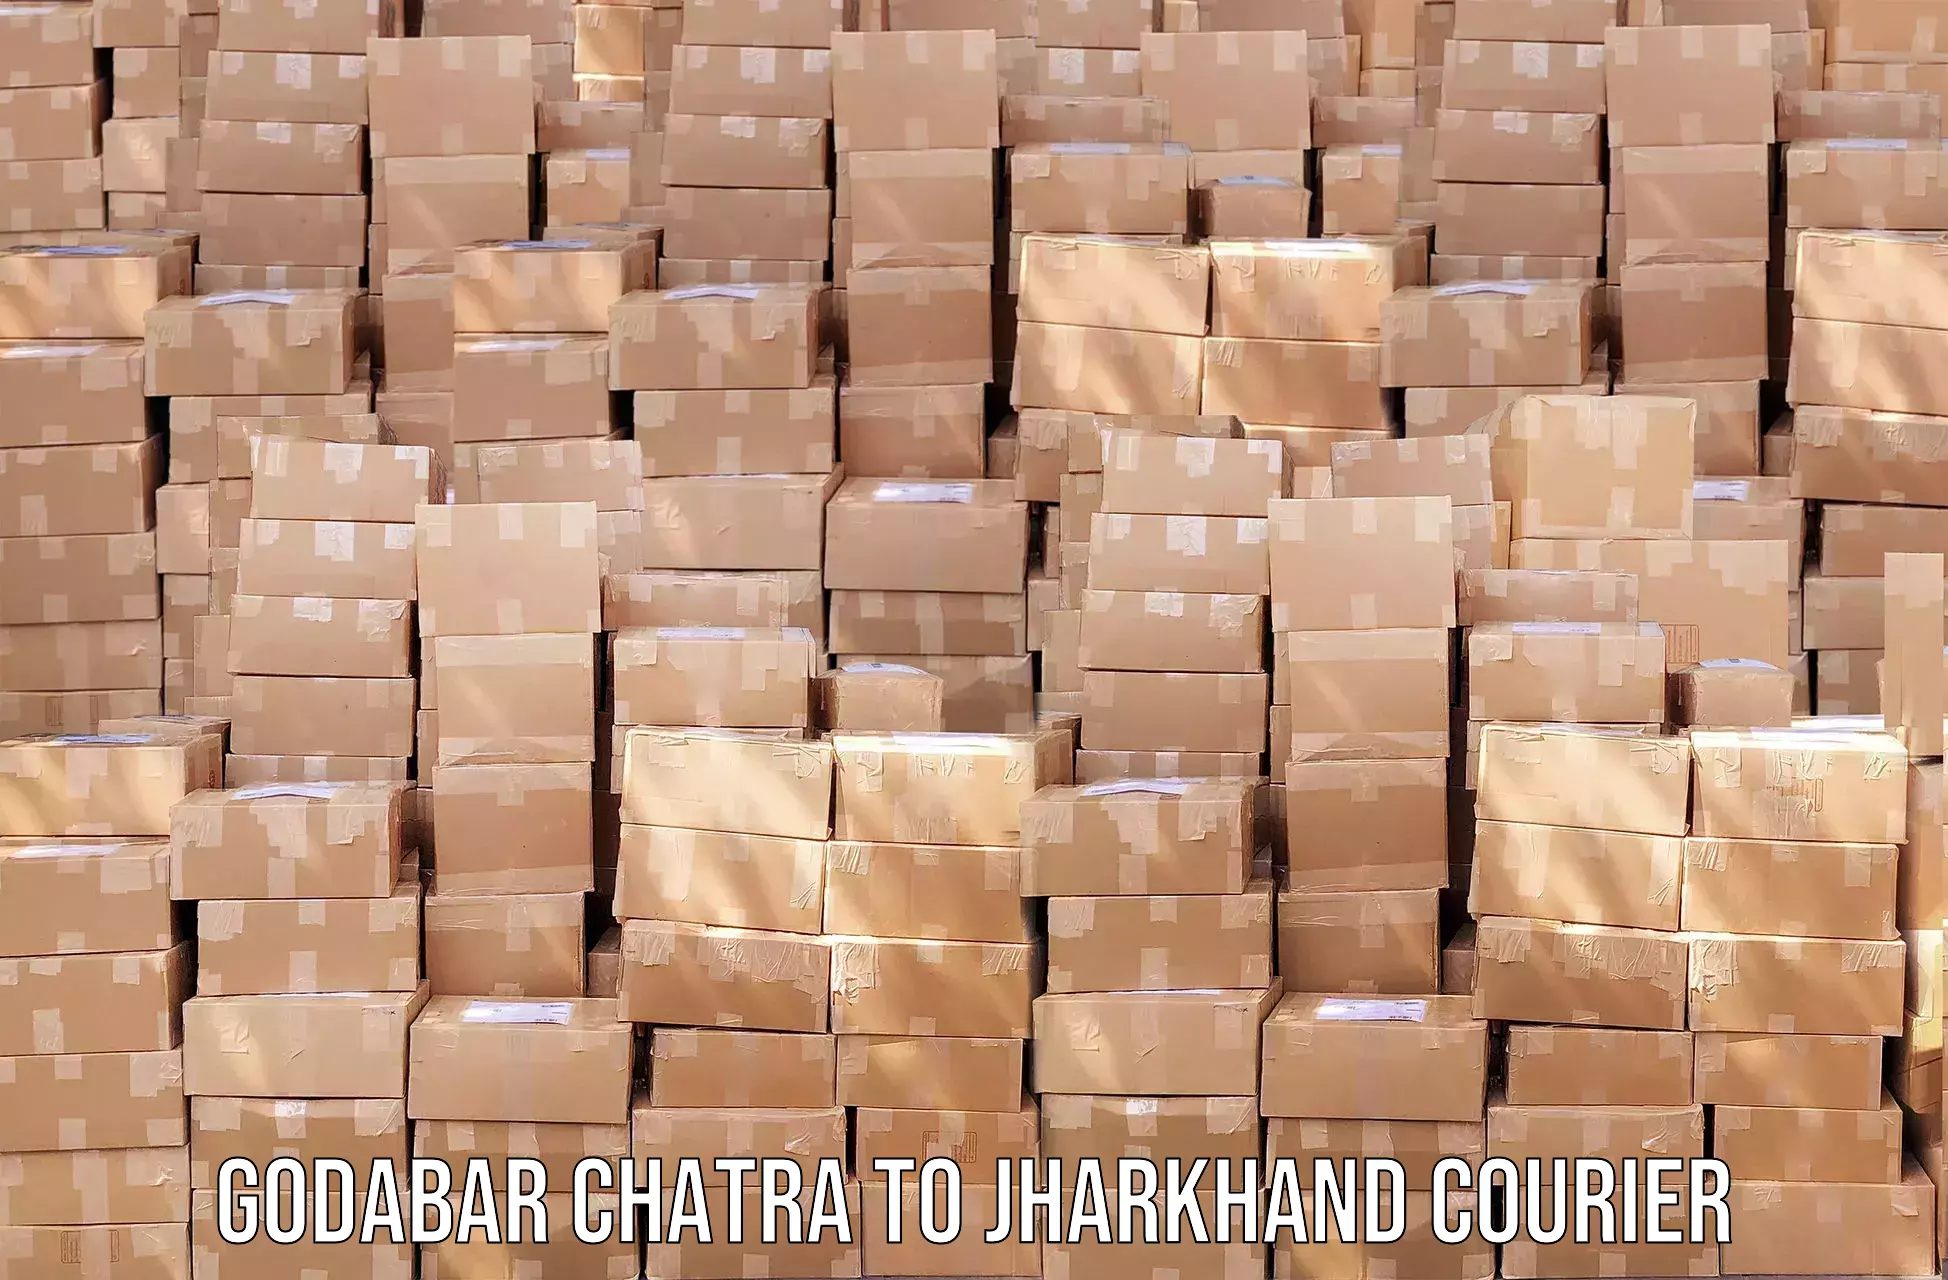 Tracking updates in Godabar Chatra to Jharkhand